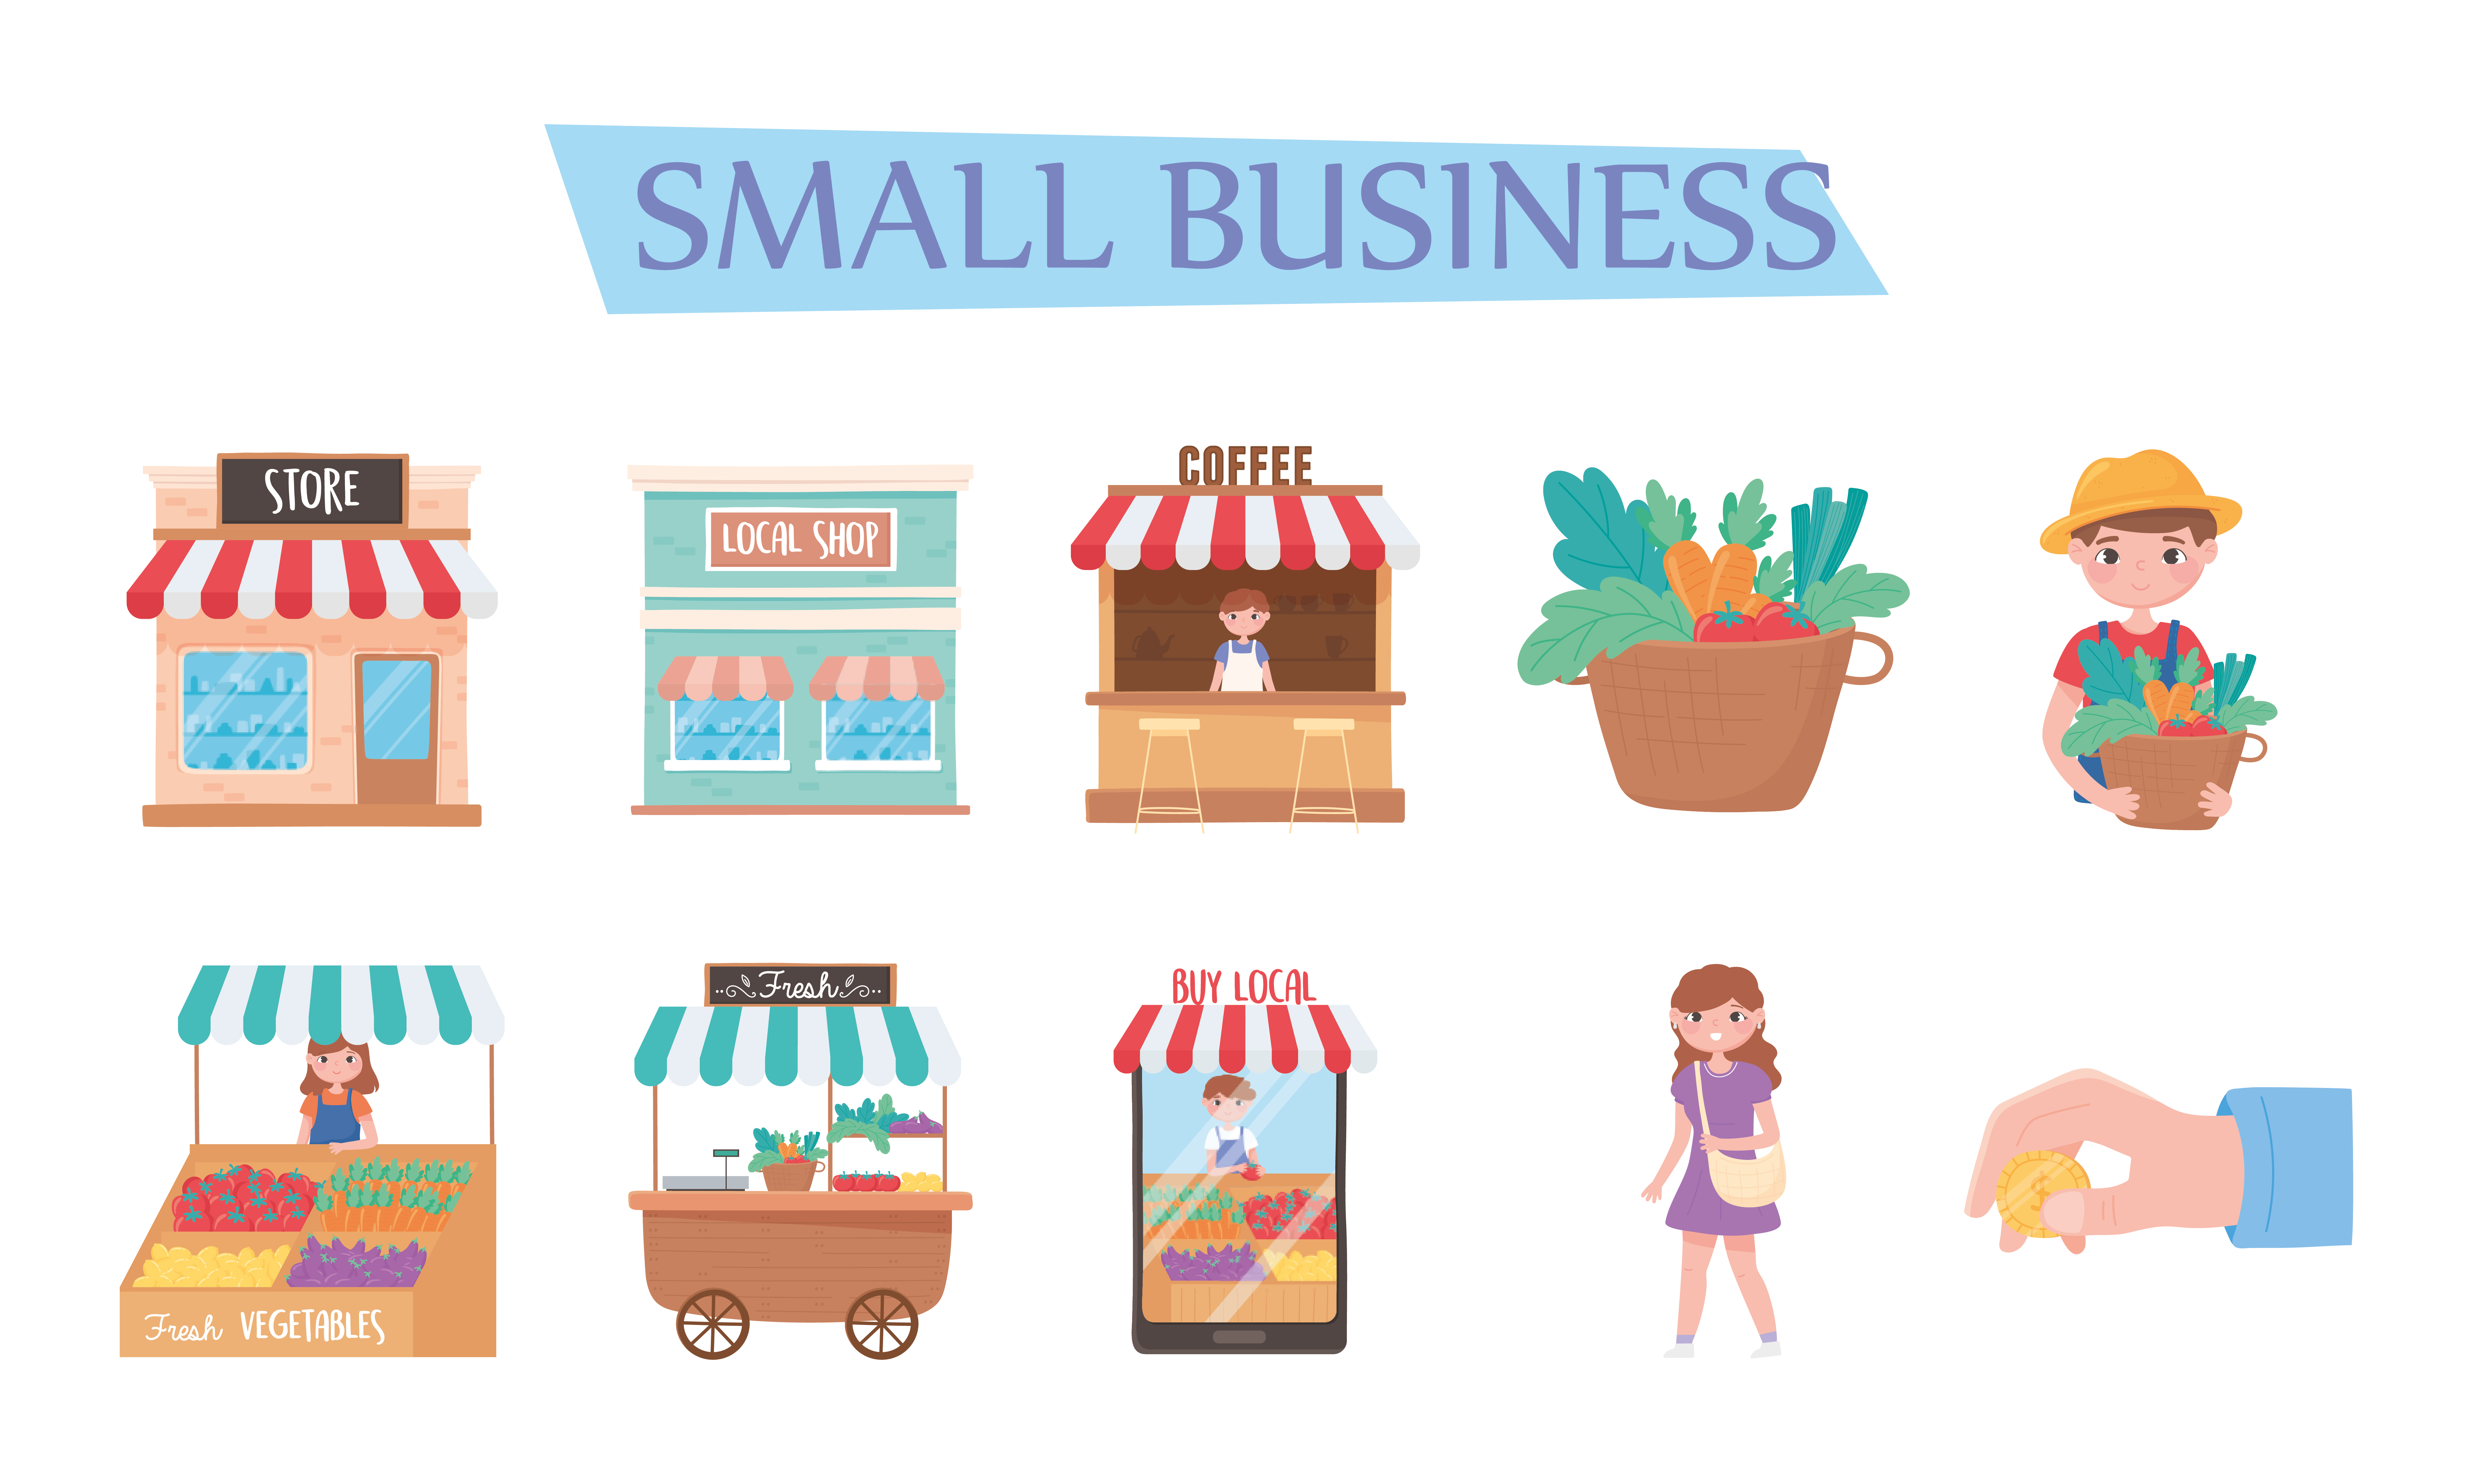 Small local shops. Shops and shopping. Local shop. Before bought we open bought icons PNG. My local shops